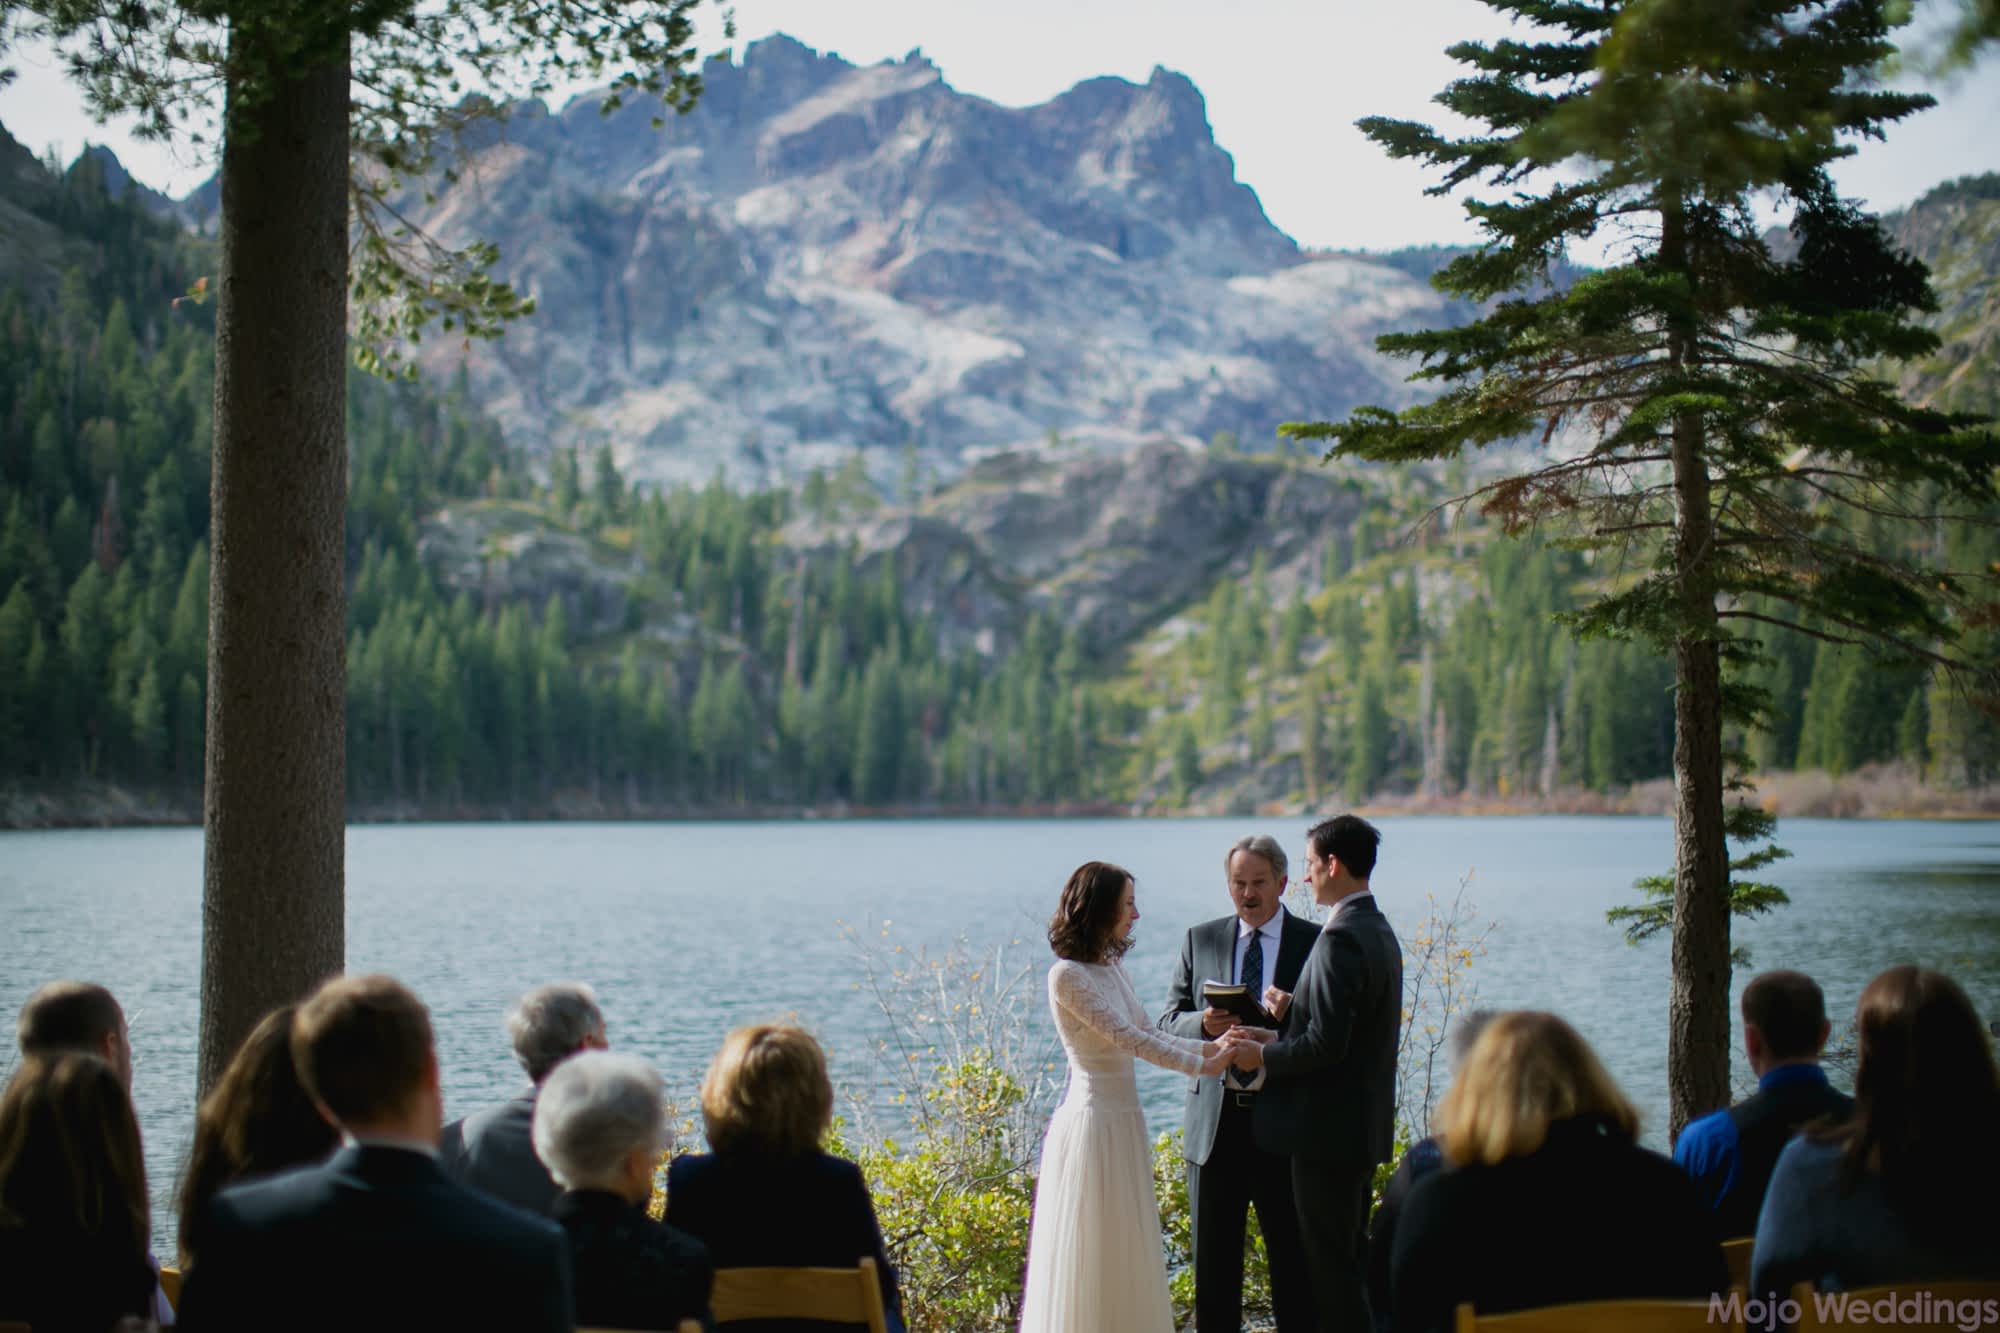 Another lovely ceremony photo showing off the lake in the background.